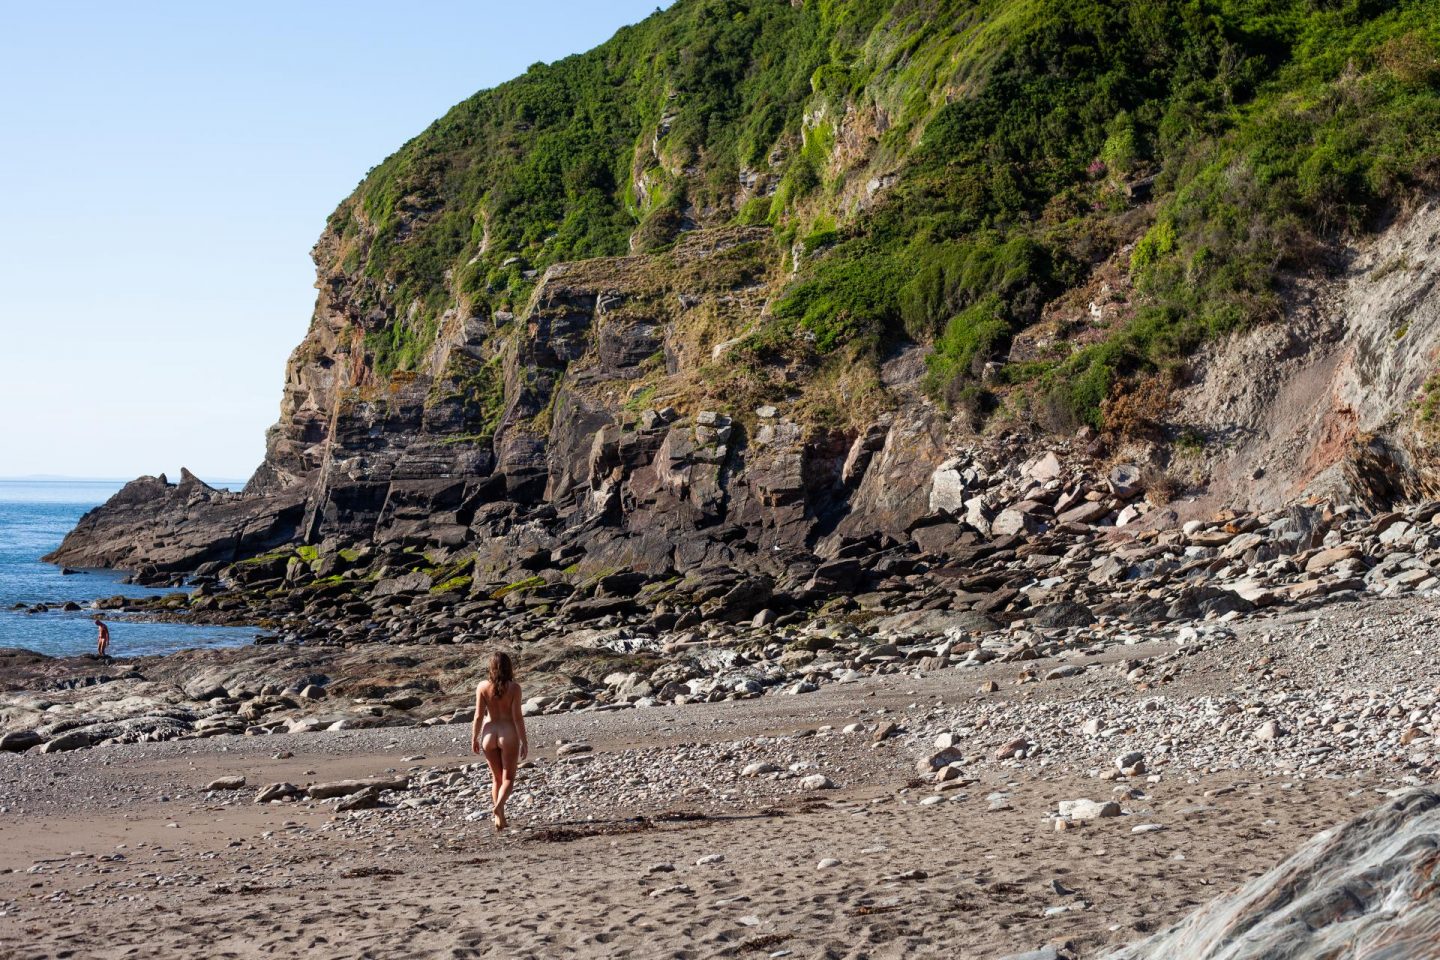 The best skinny dipping beaches in Britain